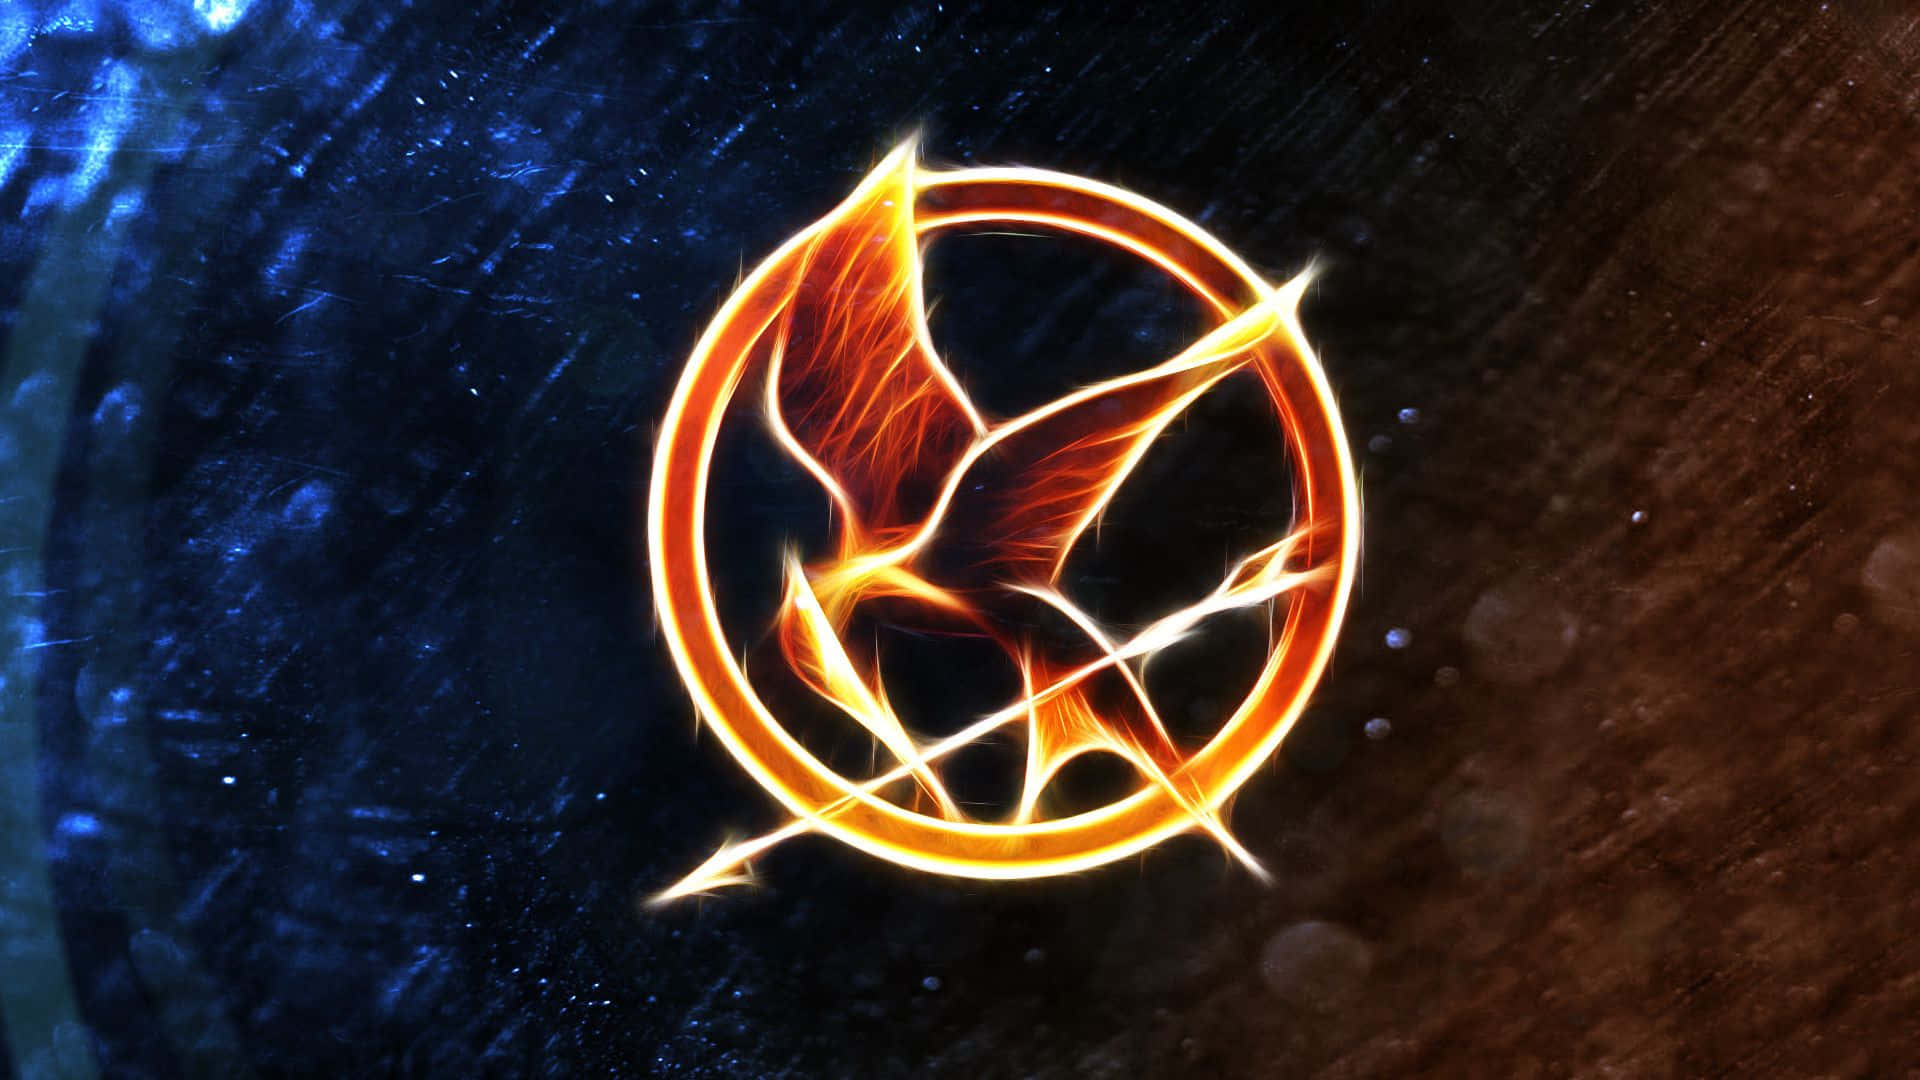 The Hunger Games Logo On A Dark Background